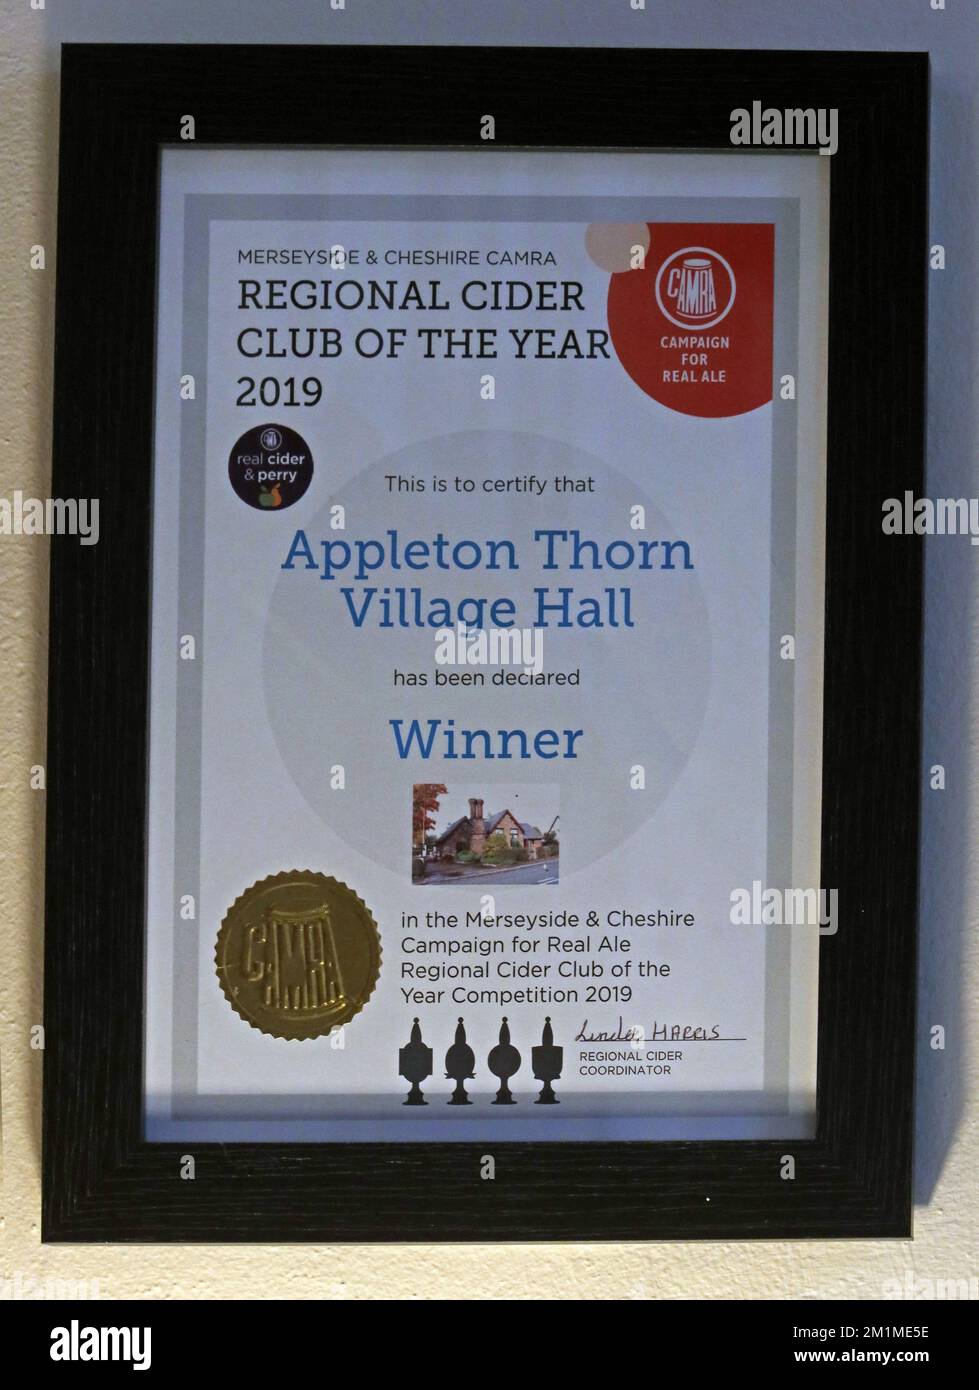 Merseyside & Cheshire CAMRA, Regional Cider Club of the Year 2019, Appleton Thorn Village Hall, certificat encadré gagnant Banque D'Images